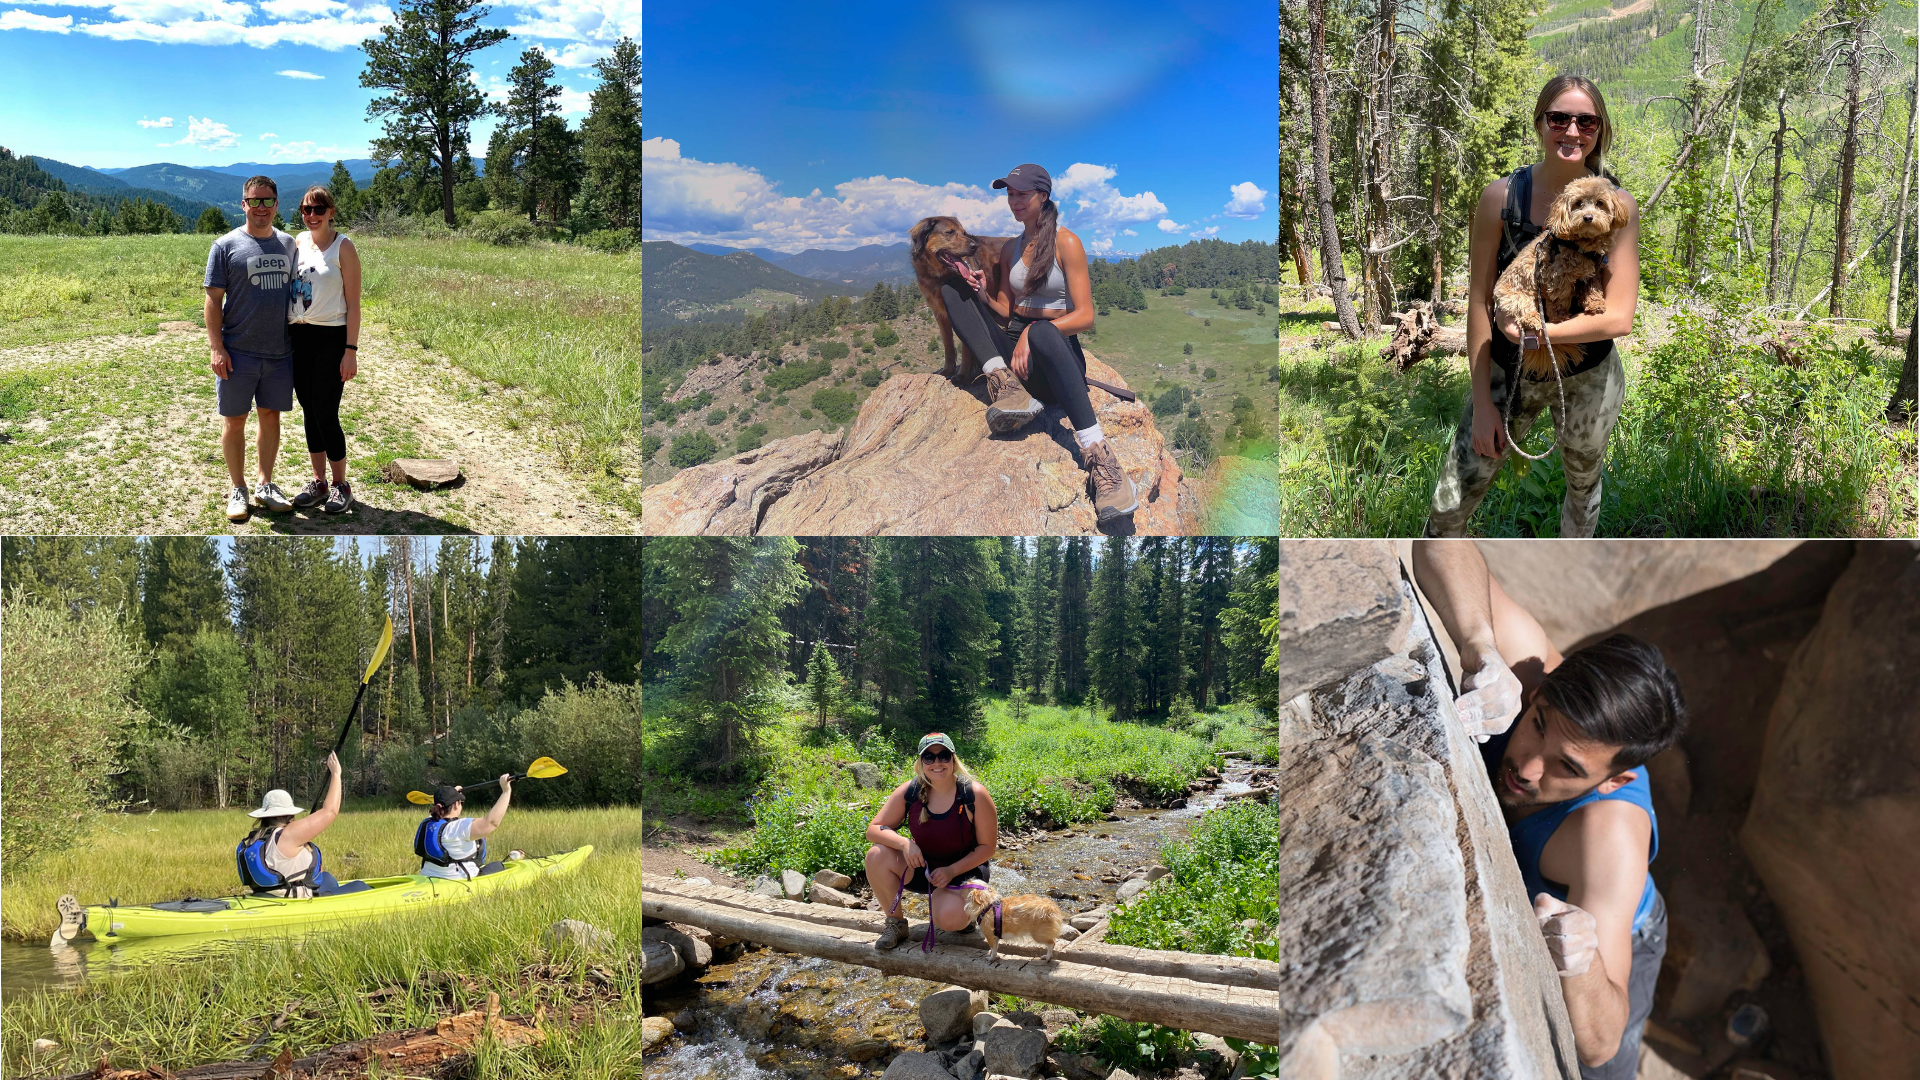 Digible’s team enjoying the beautiful outdoors here in Colorful Colorado